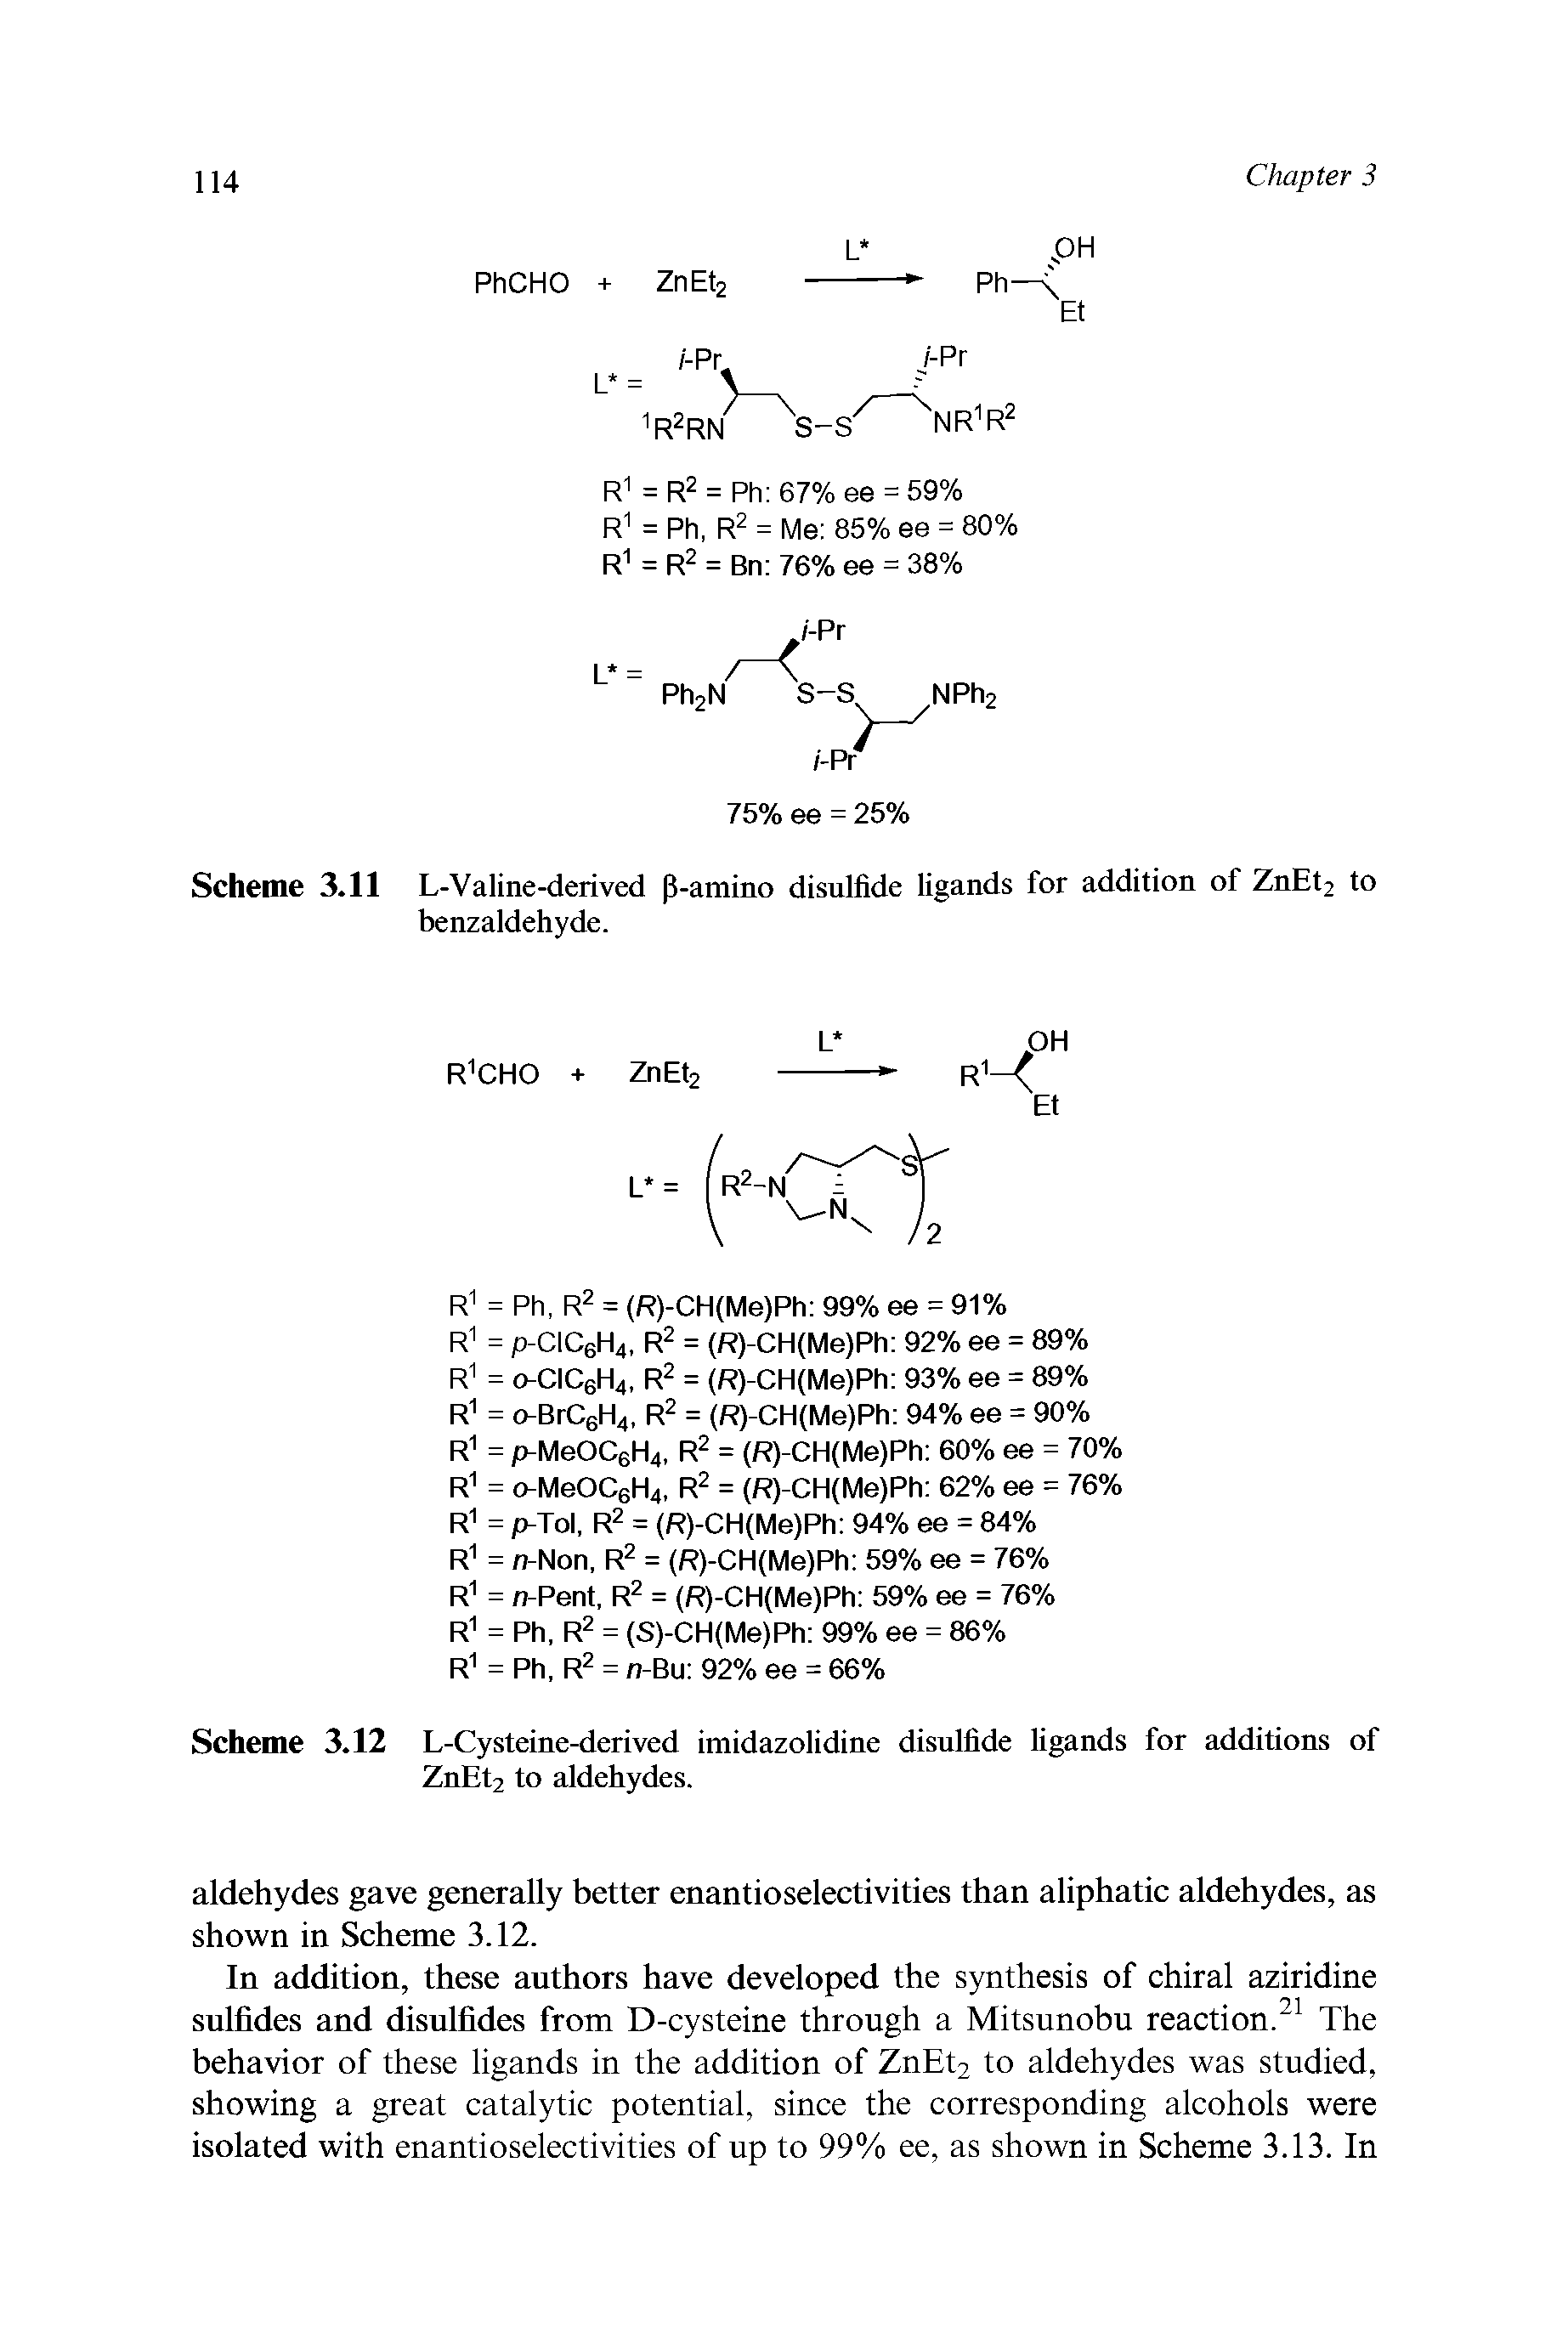 Scheme 3.11 L-Valine-derived P-amino disulfide ligands for addition of ZnEt2 to benzaldehyde.